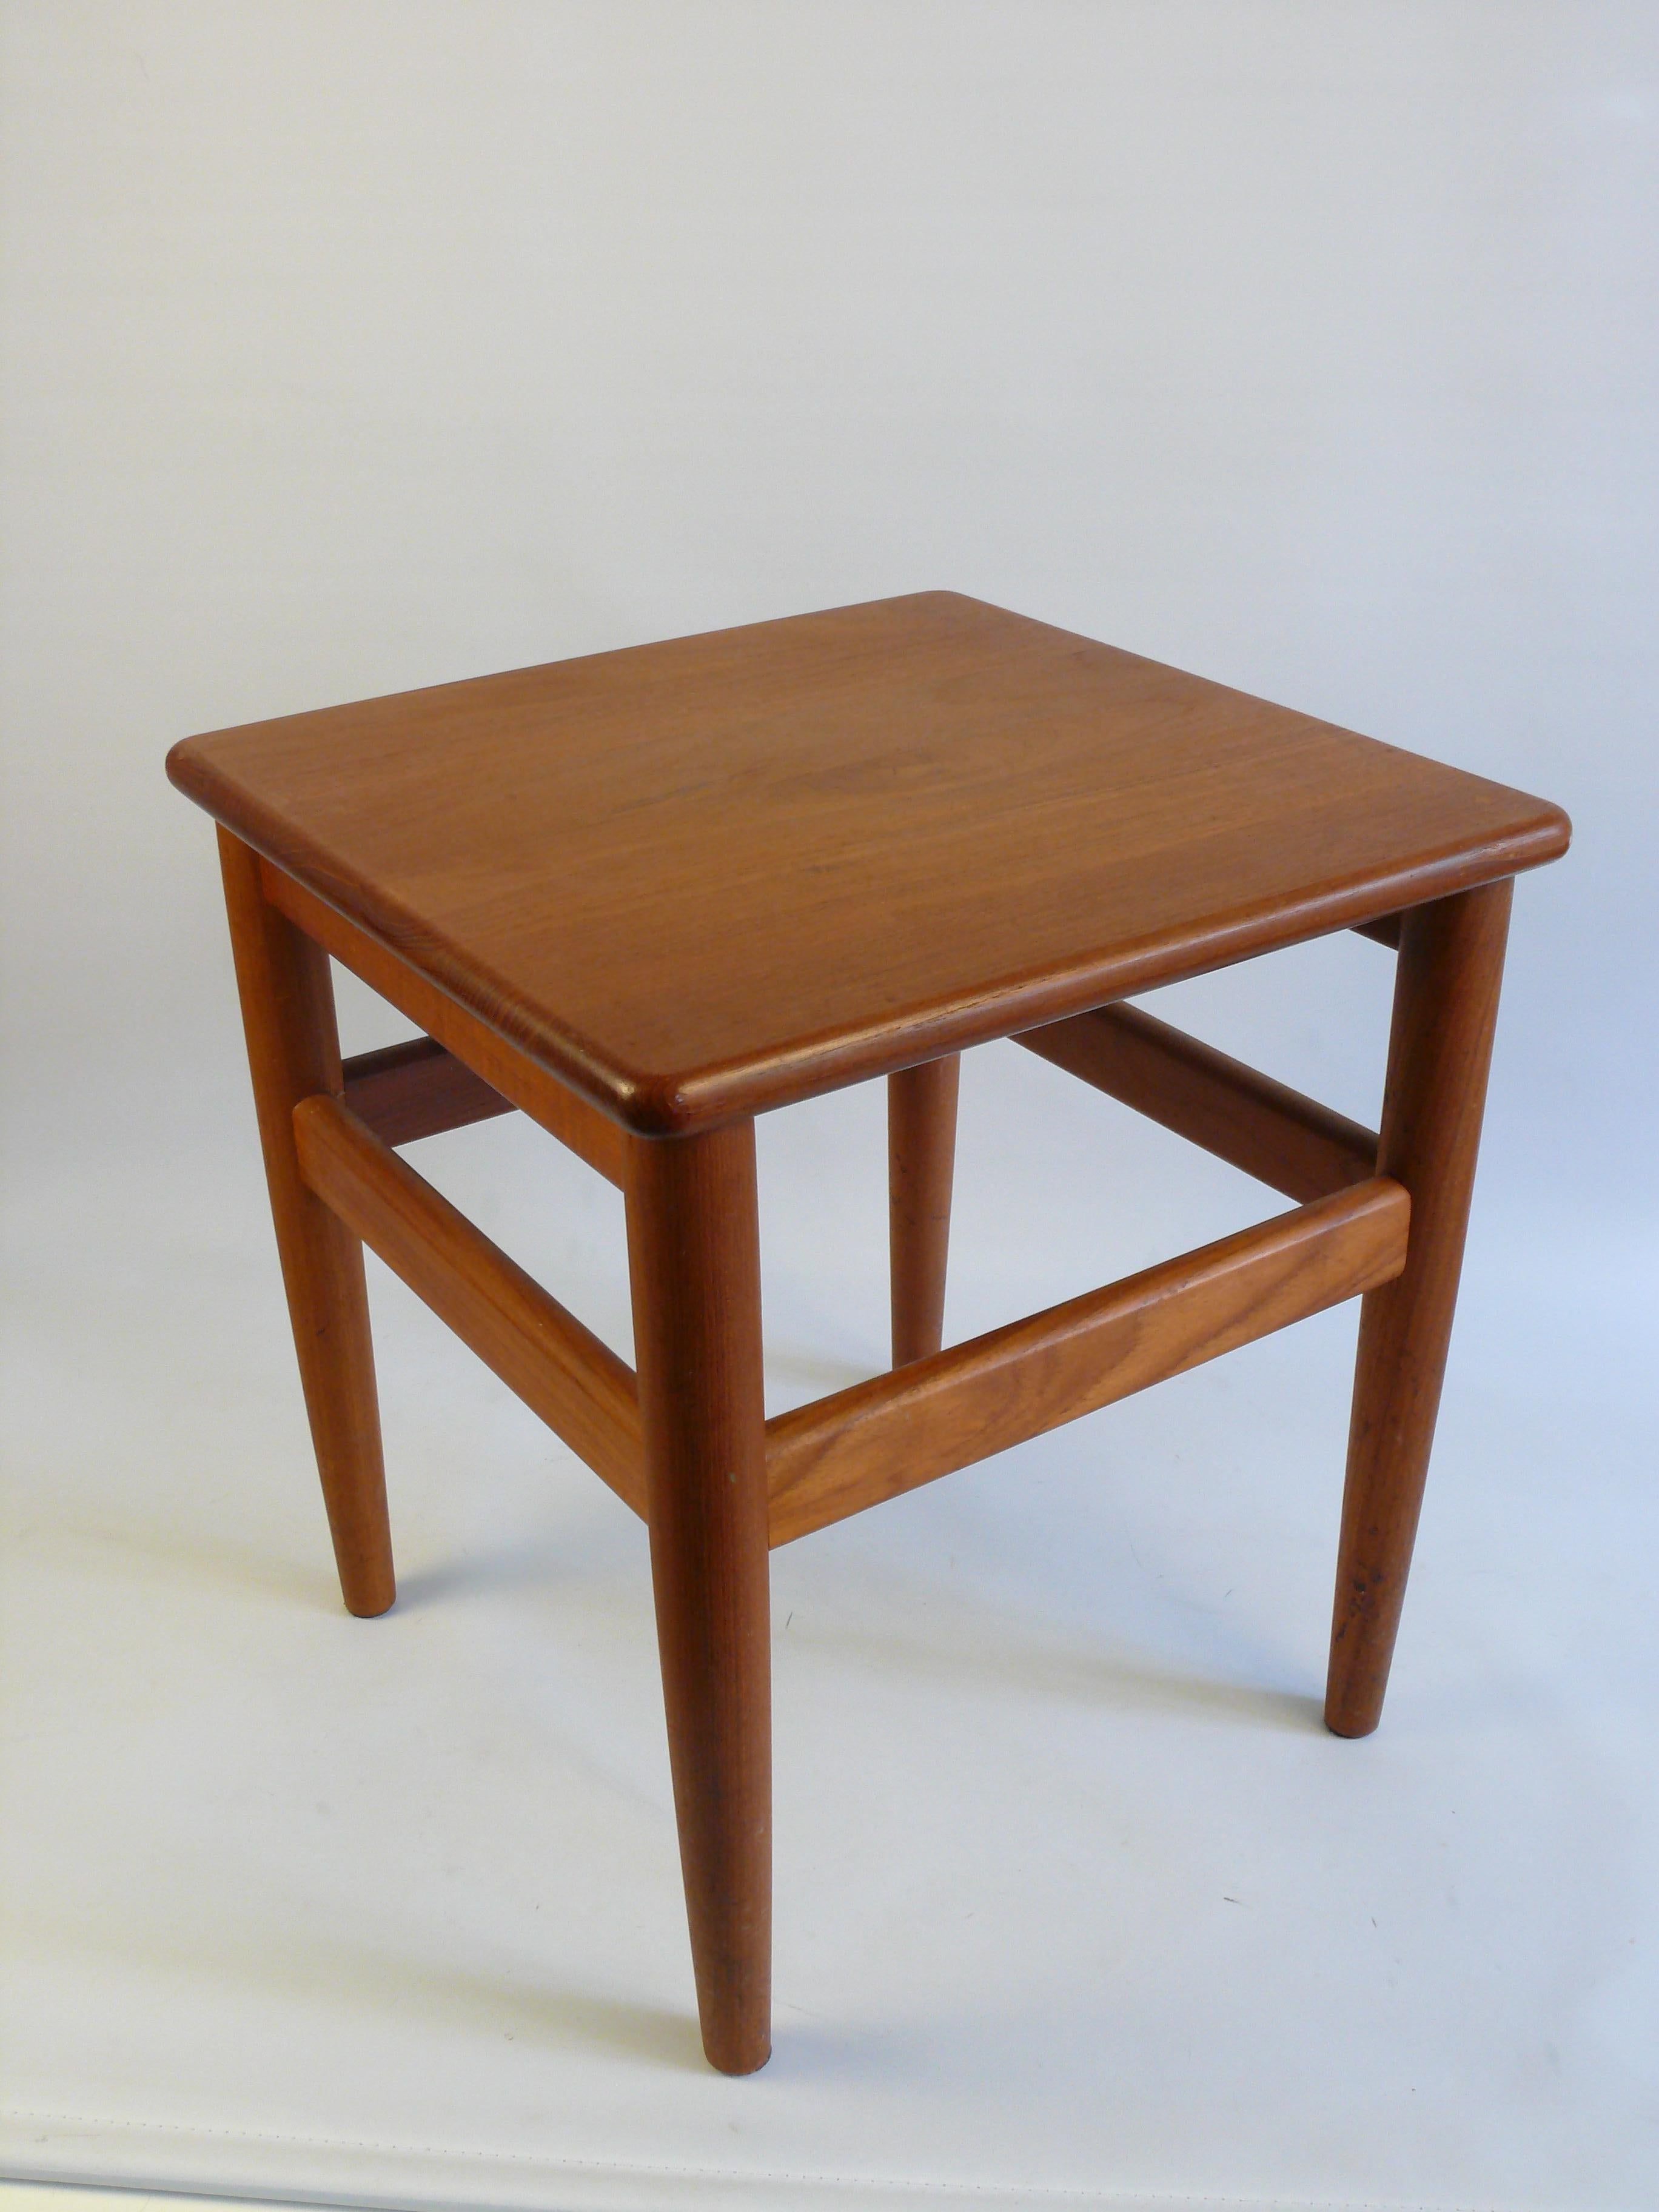 Well-preserved side table/tabouret/stool made of teak wood in Danish design from the 1960s, solid and very stable, probably from Salin, Nybork Denmark - no company logo available. The plate has rounded edges. The surface of the plate shows usual